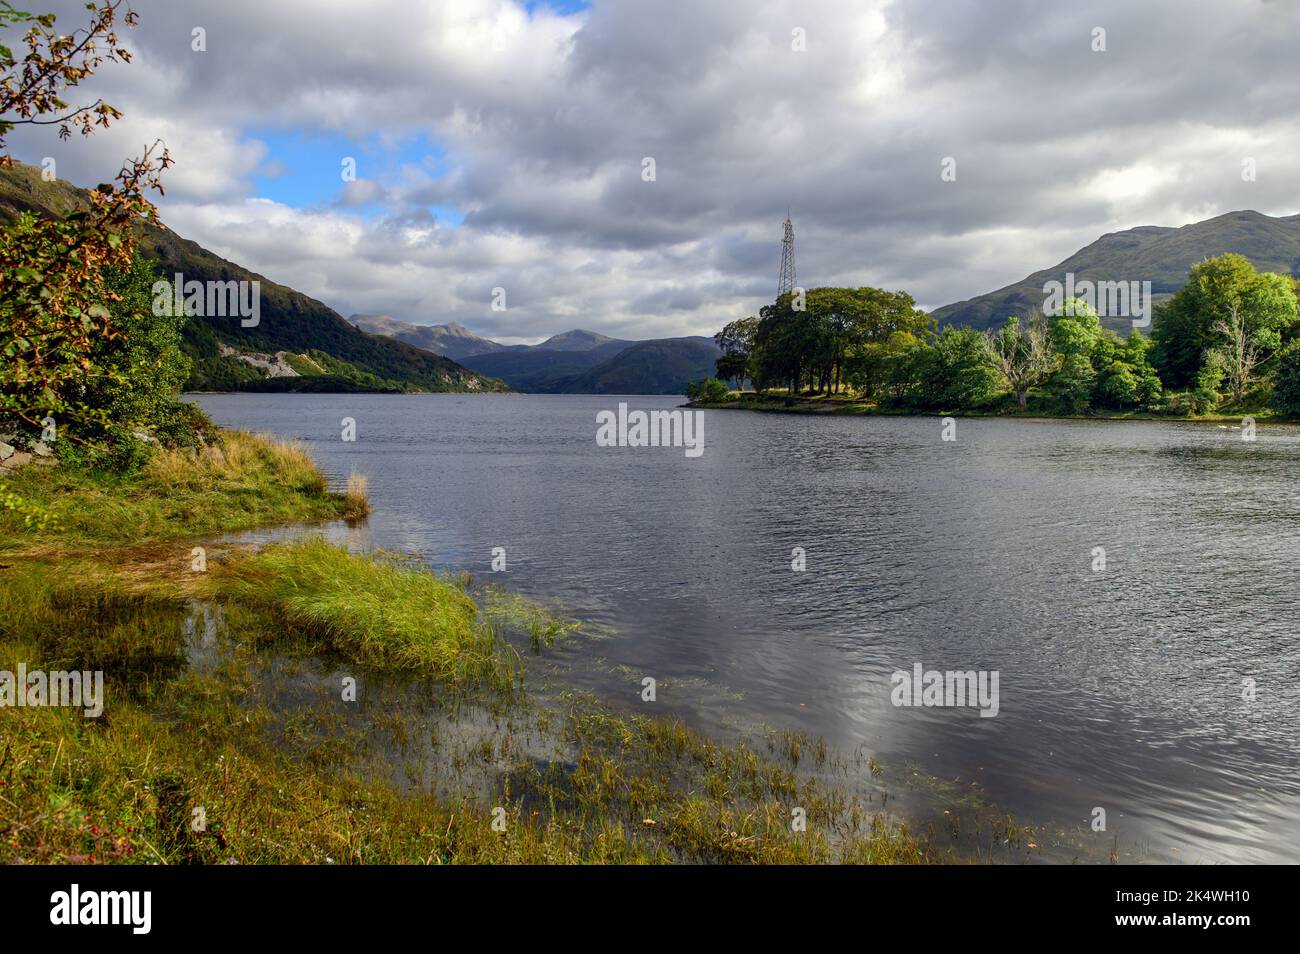 Loch Etive from the mouth of River Awe at Taynuilt in Argyll, Scotland Stock Photo